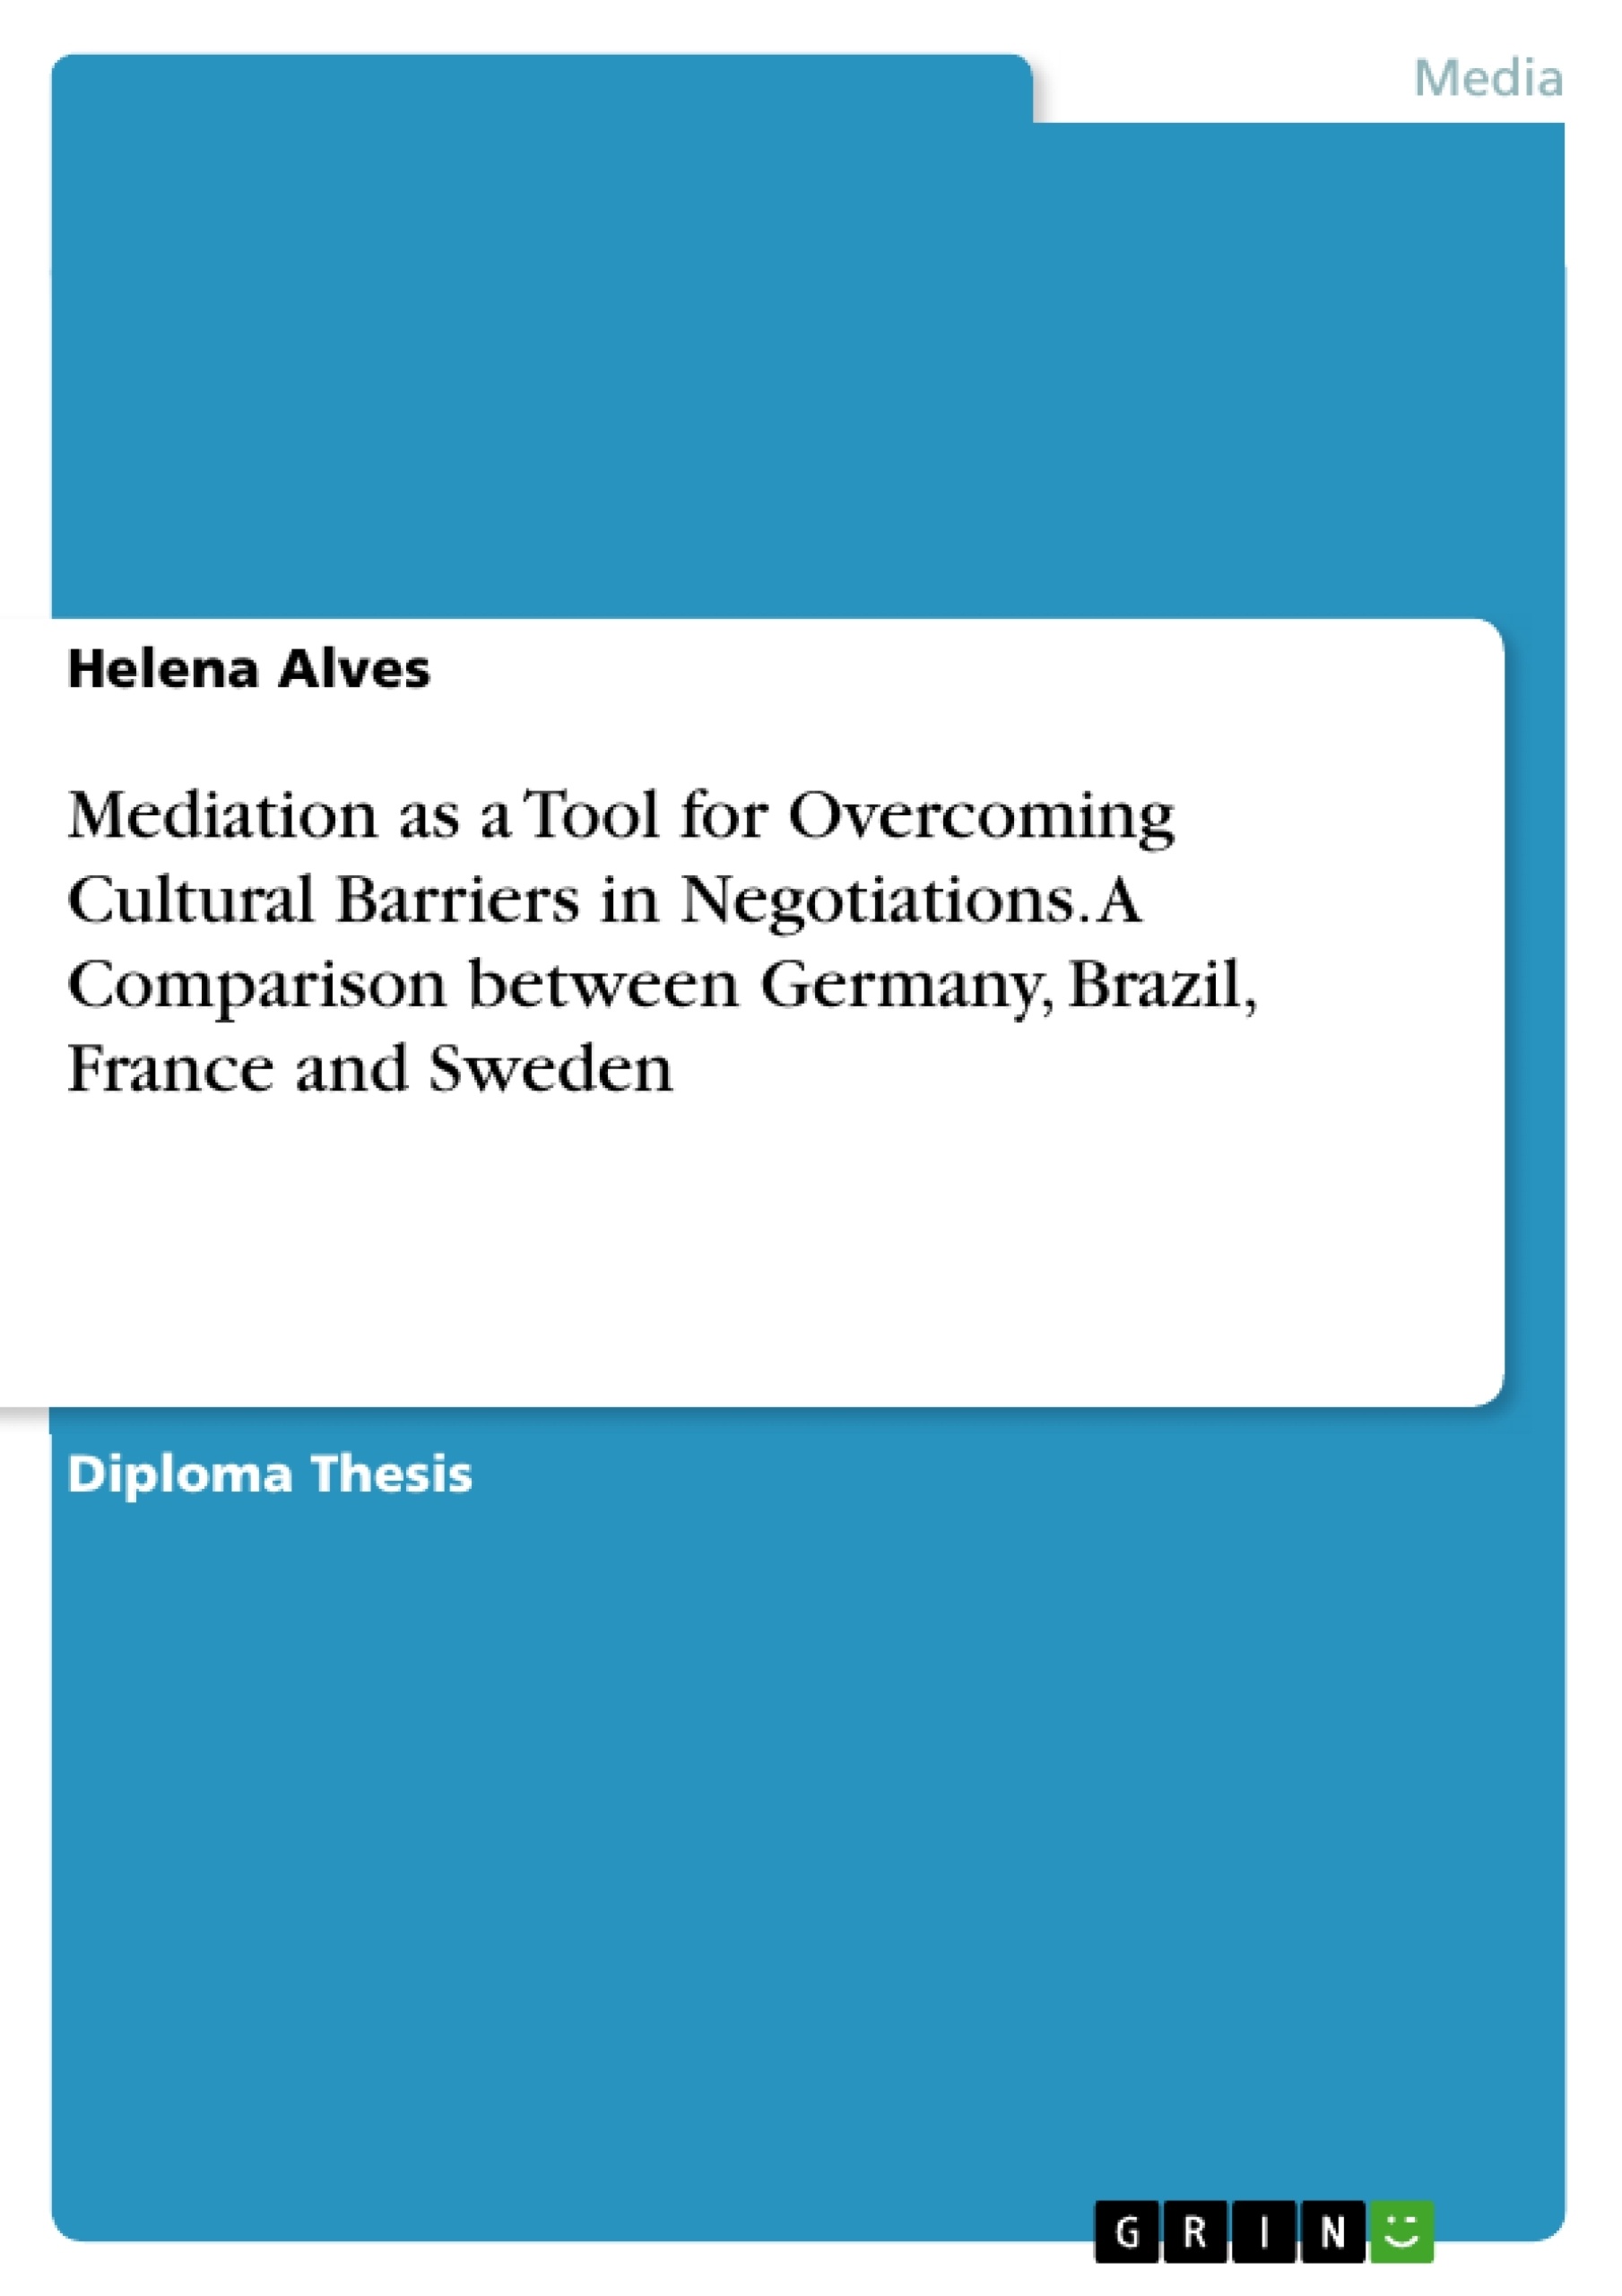 Titre: Mediation as a Tool for Overcoming Cultural Barriers in Negotiations. A Comparison between Germany, Brazil, France and Sweden